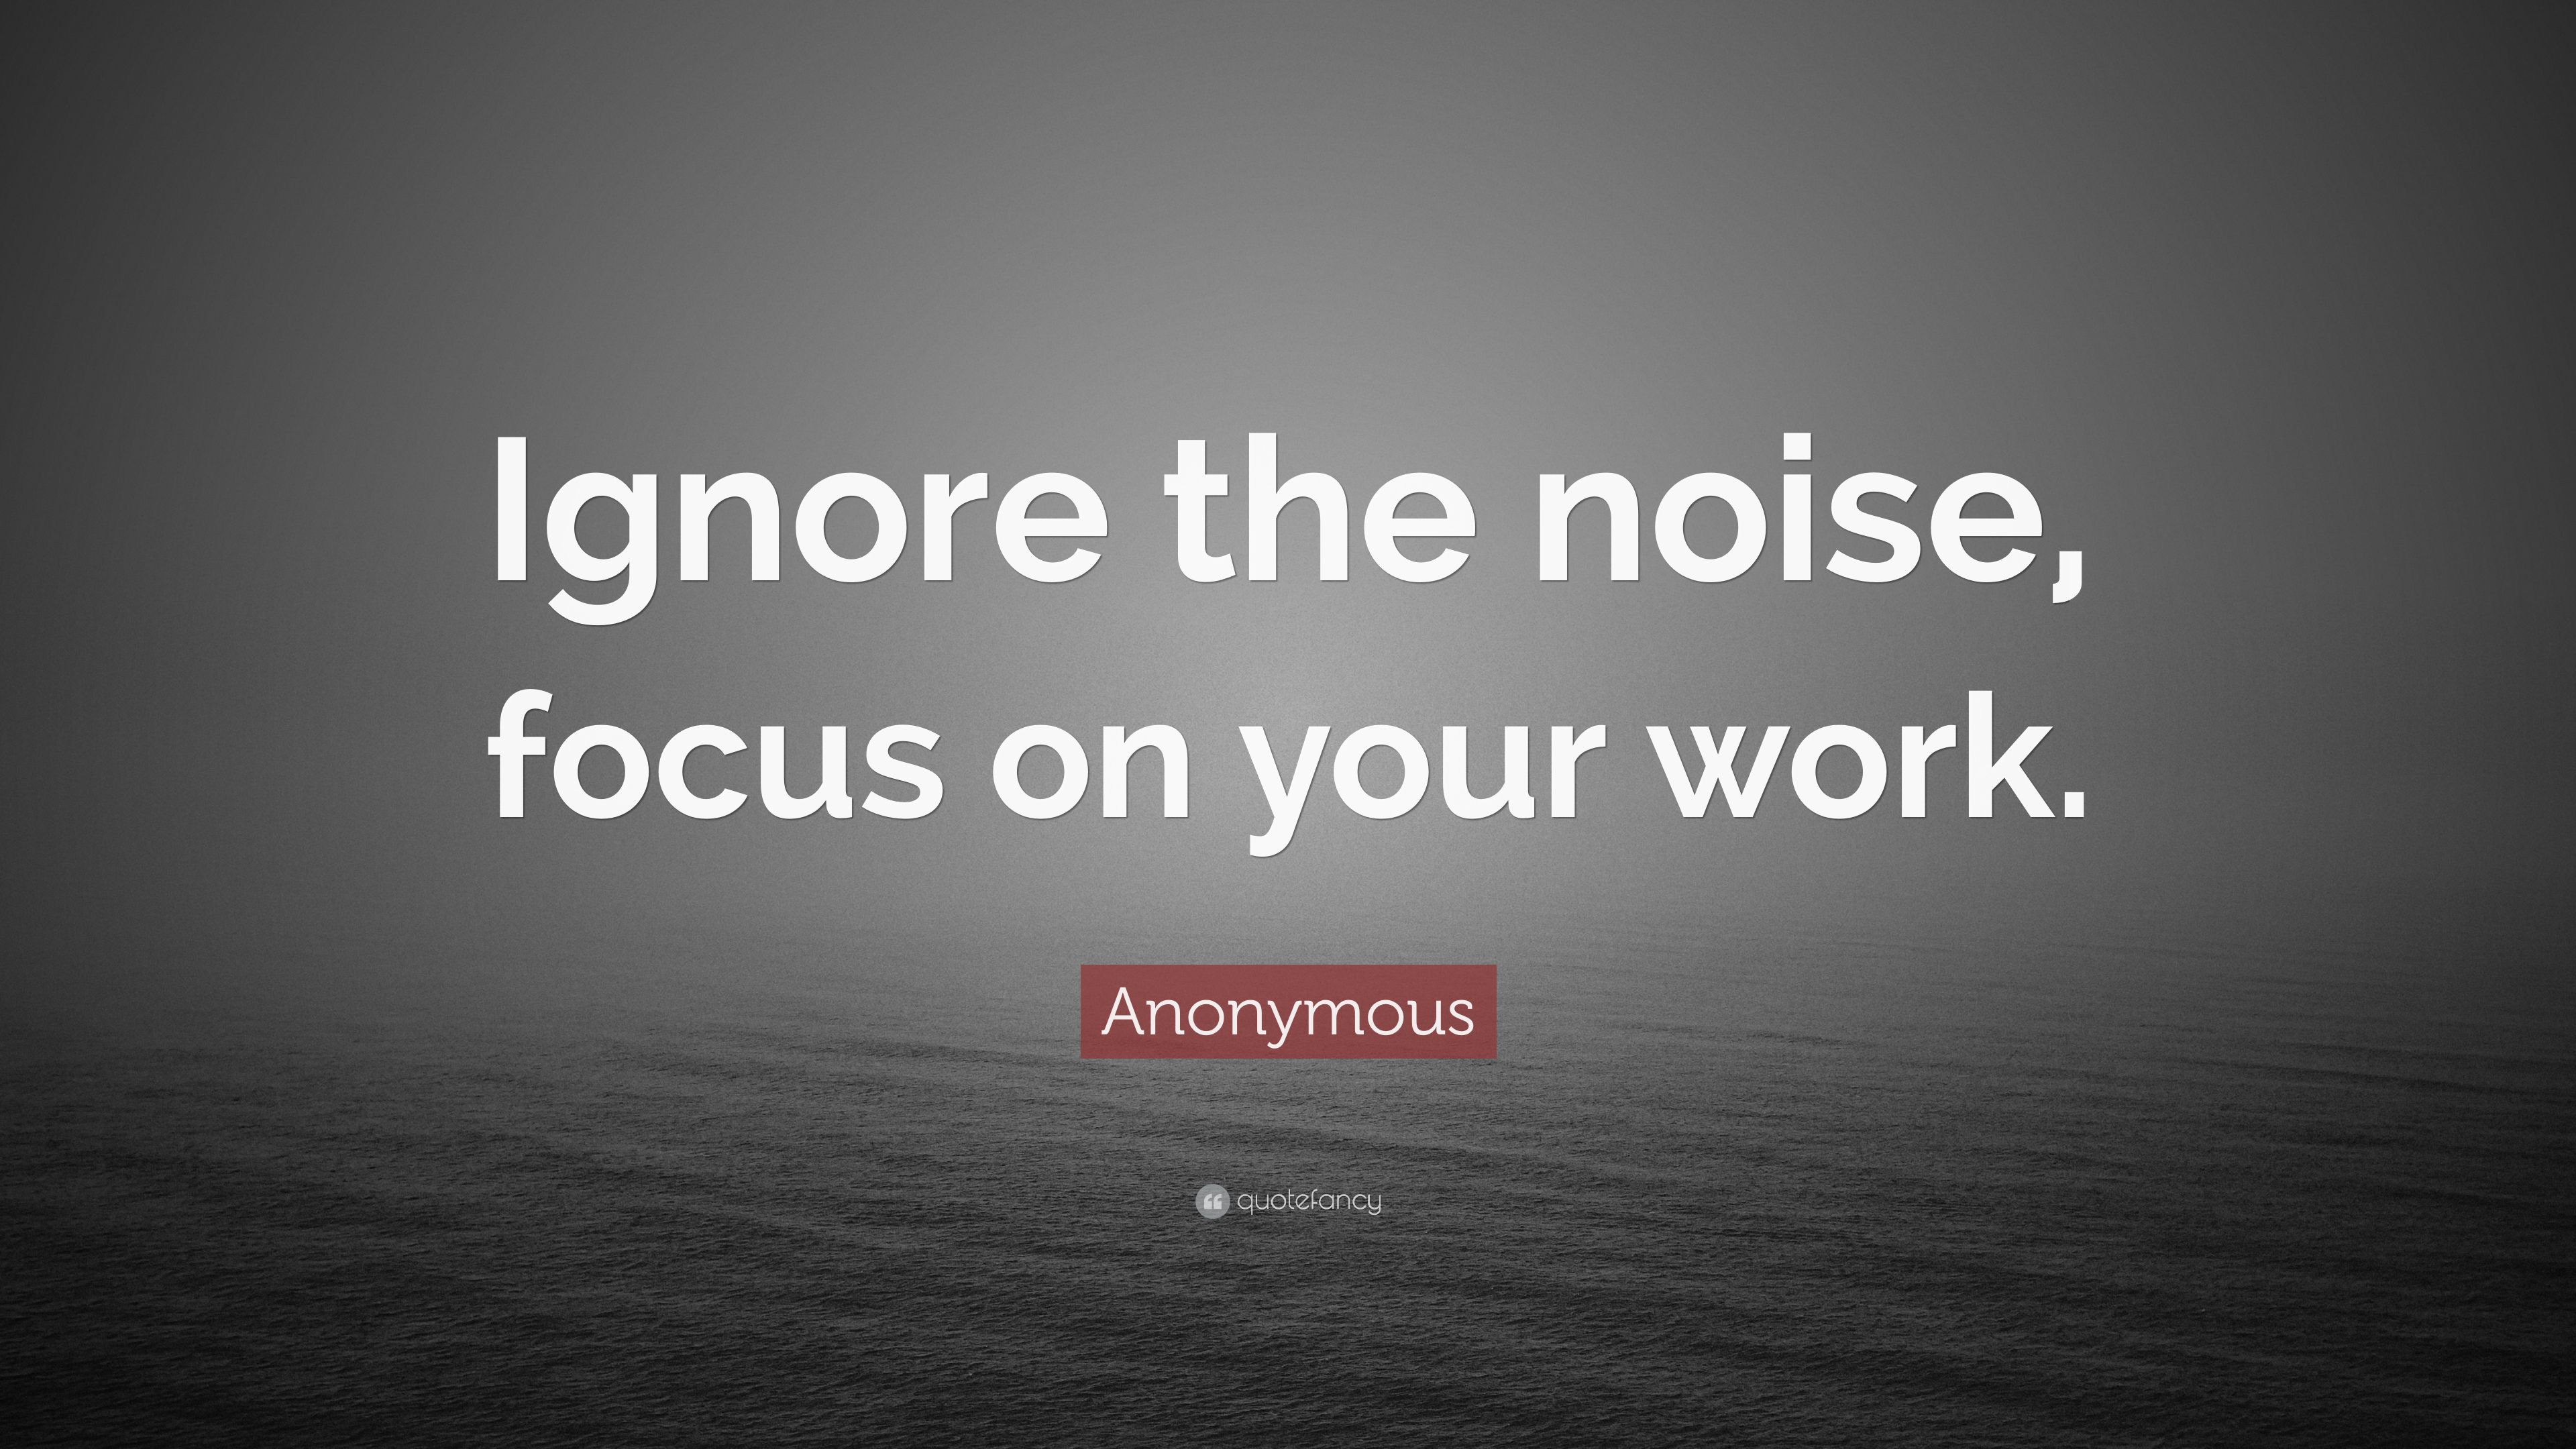 Anonymous Quote: “Ignore the noise, focus on your work.” 14